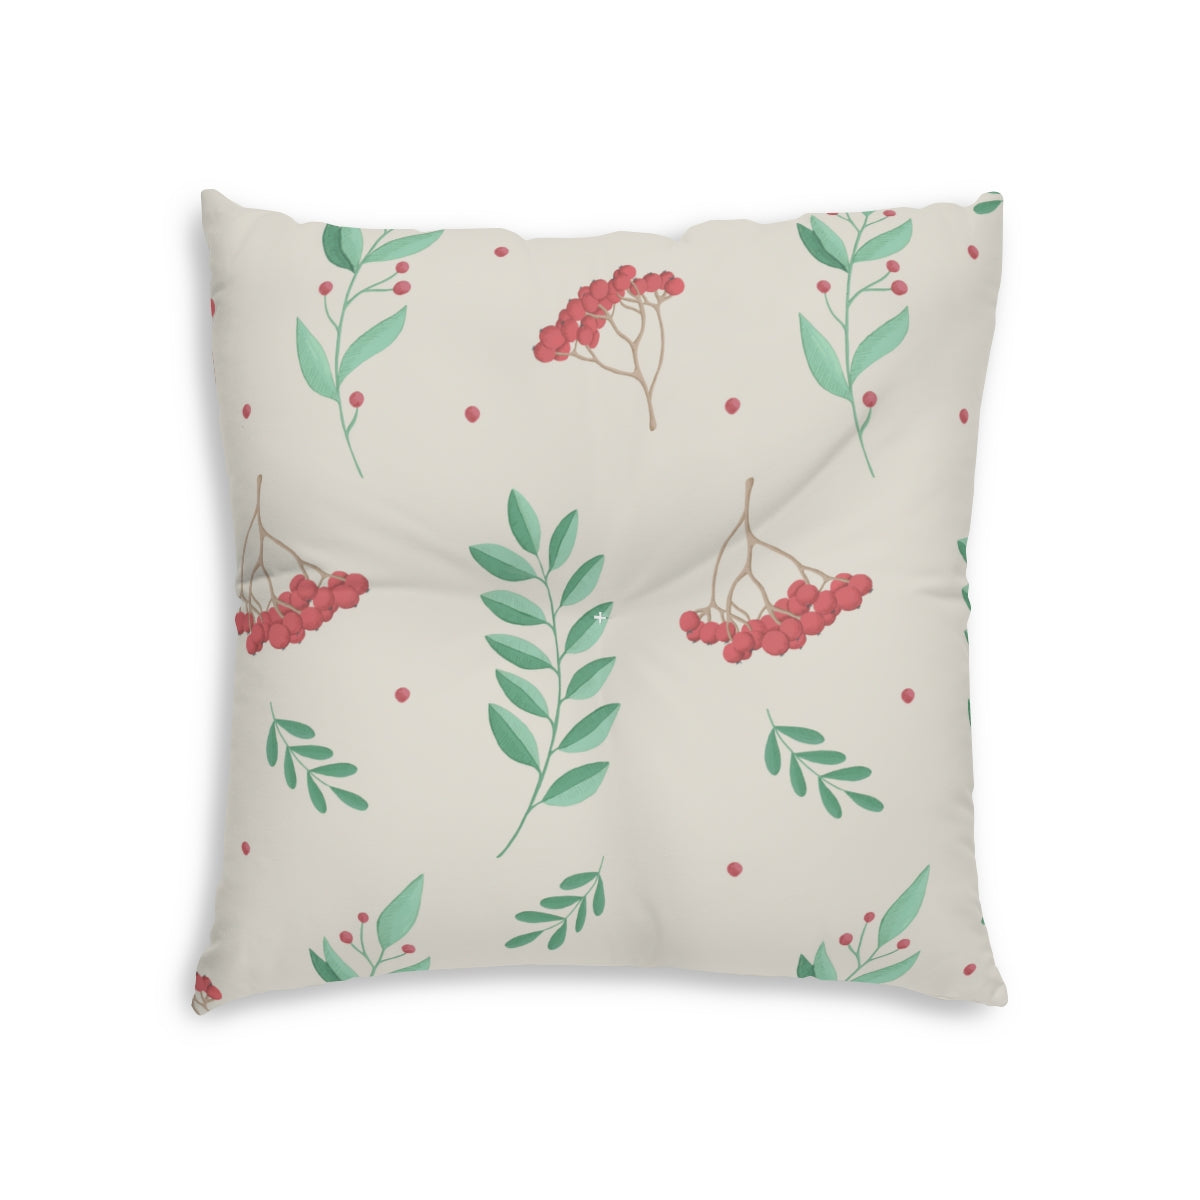 Lifestyle Details - Square Tufted Holiday Floor Pillow - Large Red & Green Hollys - 26x26 - Front View